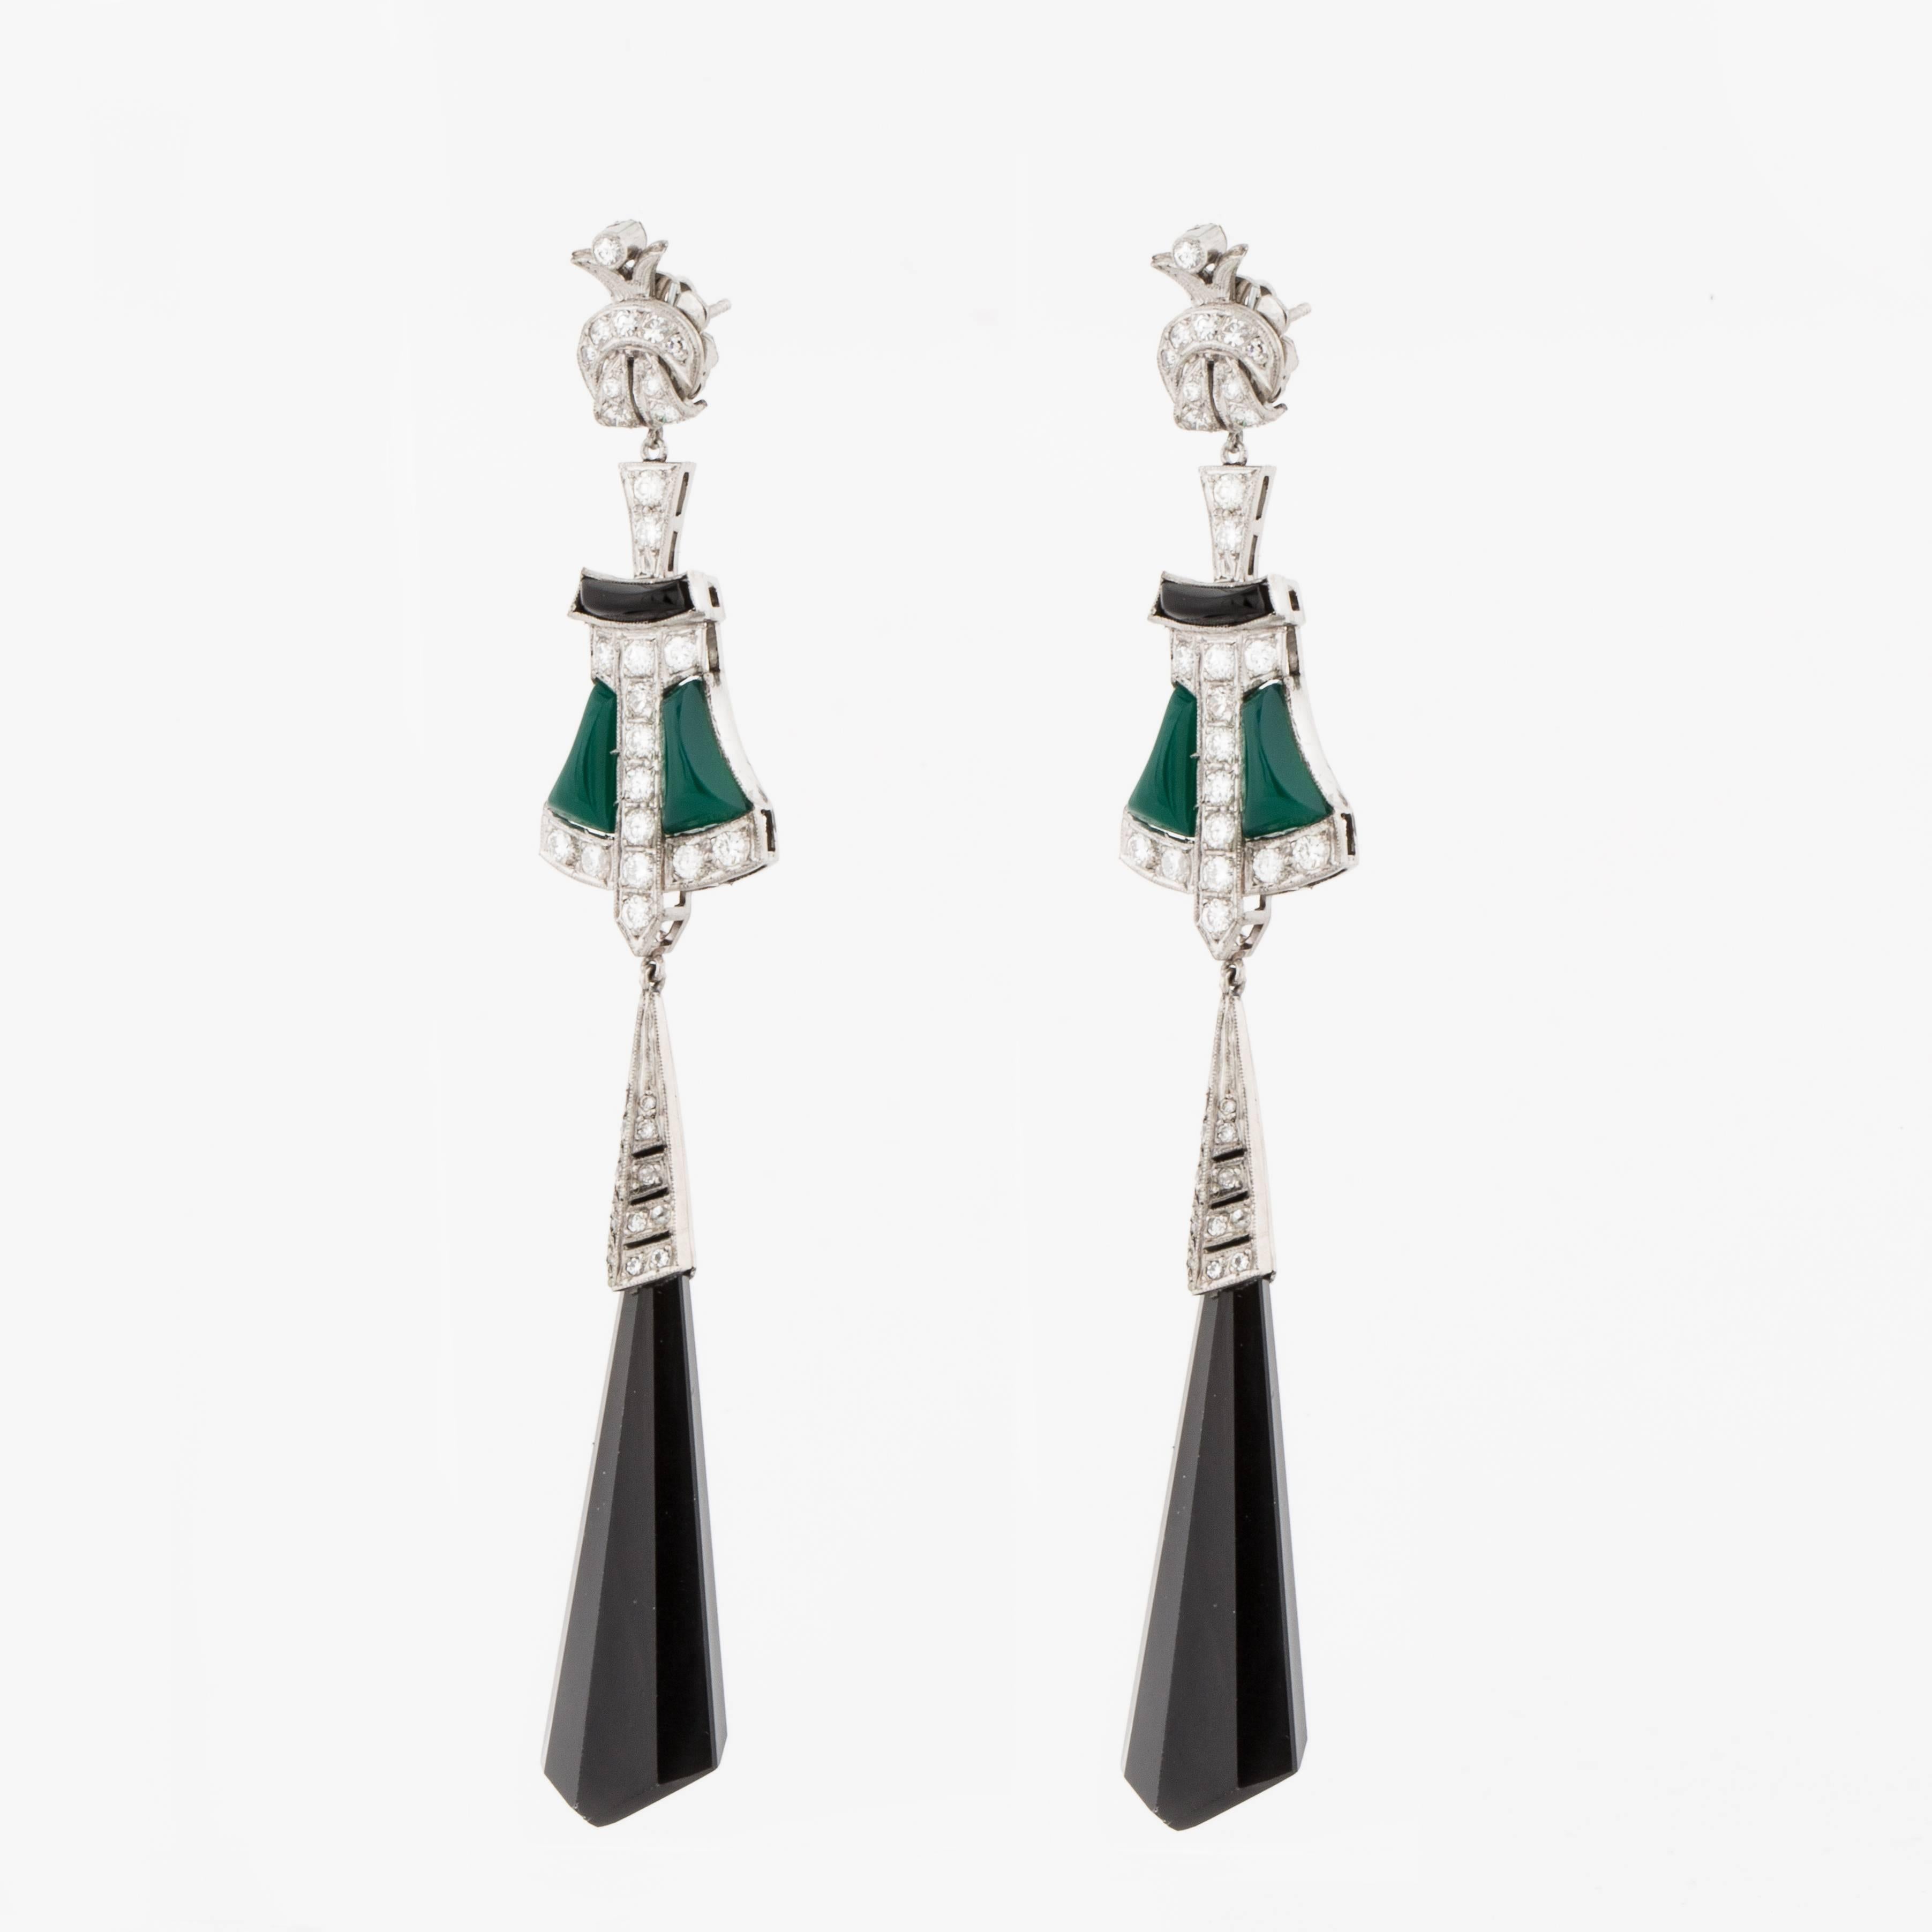 Art Deco style platinum black onyx drop earrings inset with green onyx and accented by round diamonds.  There are forty (40) round brilliant cut diamonds and thirty-eight (38) single cut diamonds that total 2.20 carats, G-H color and VS1-I1 clarity.